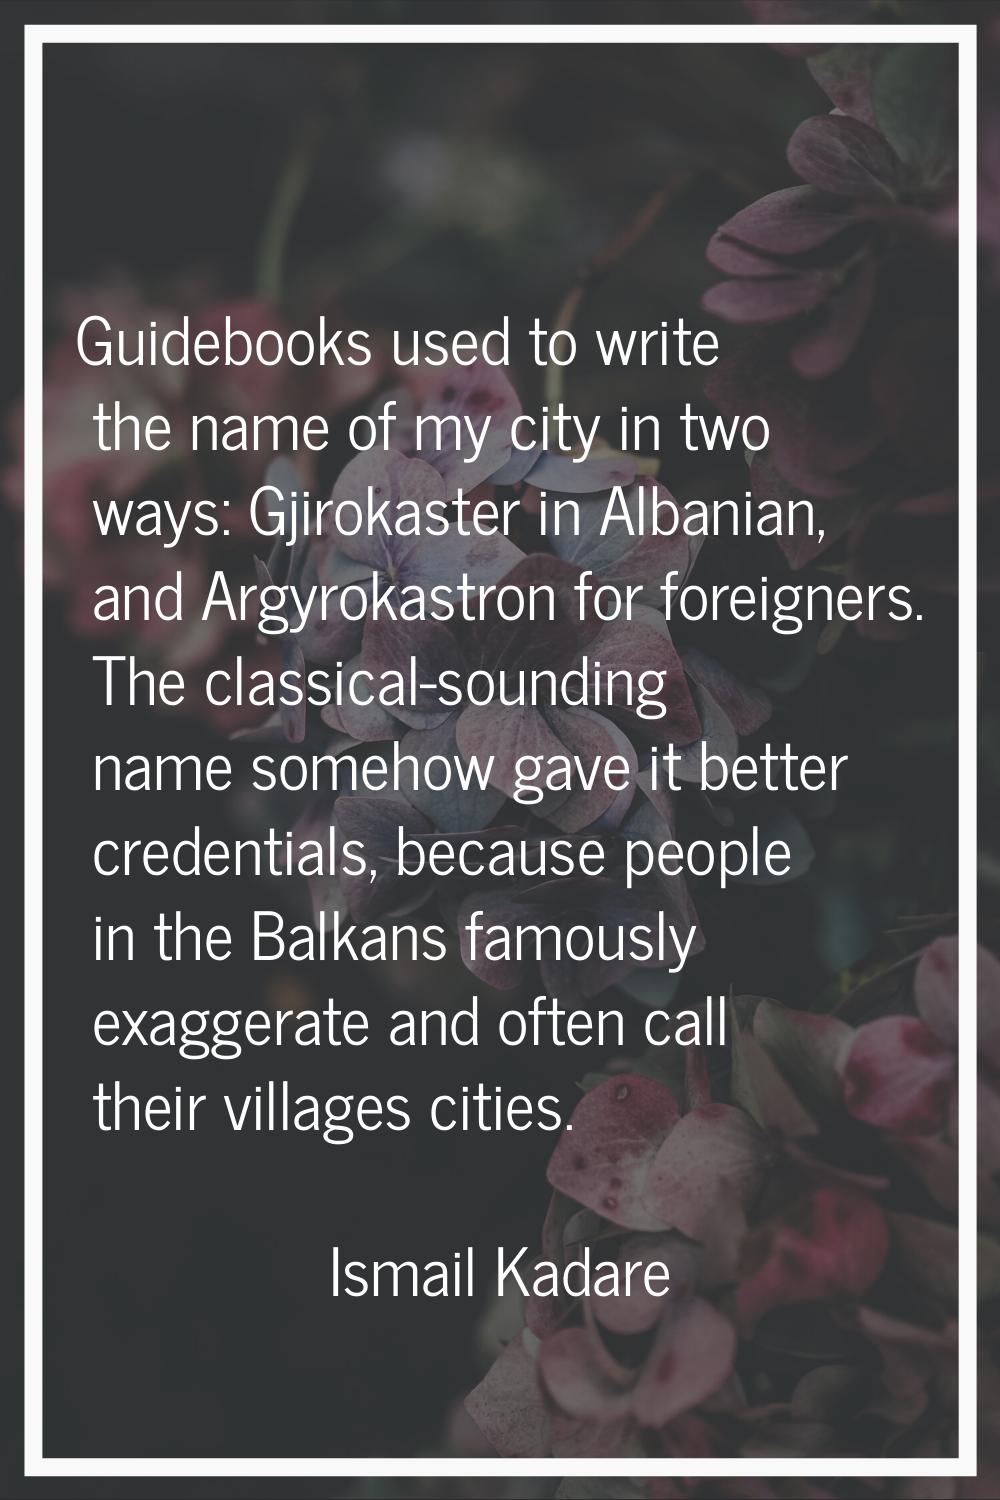 Guidebooks used to write the name of my city in two ways: Gjirokaster in Albanian, and Argyrokastro